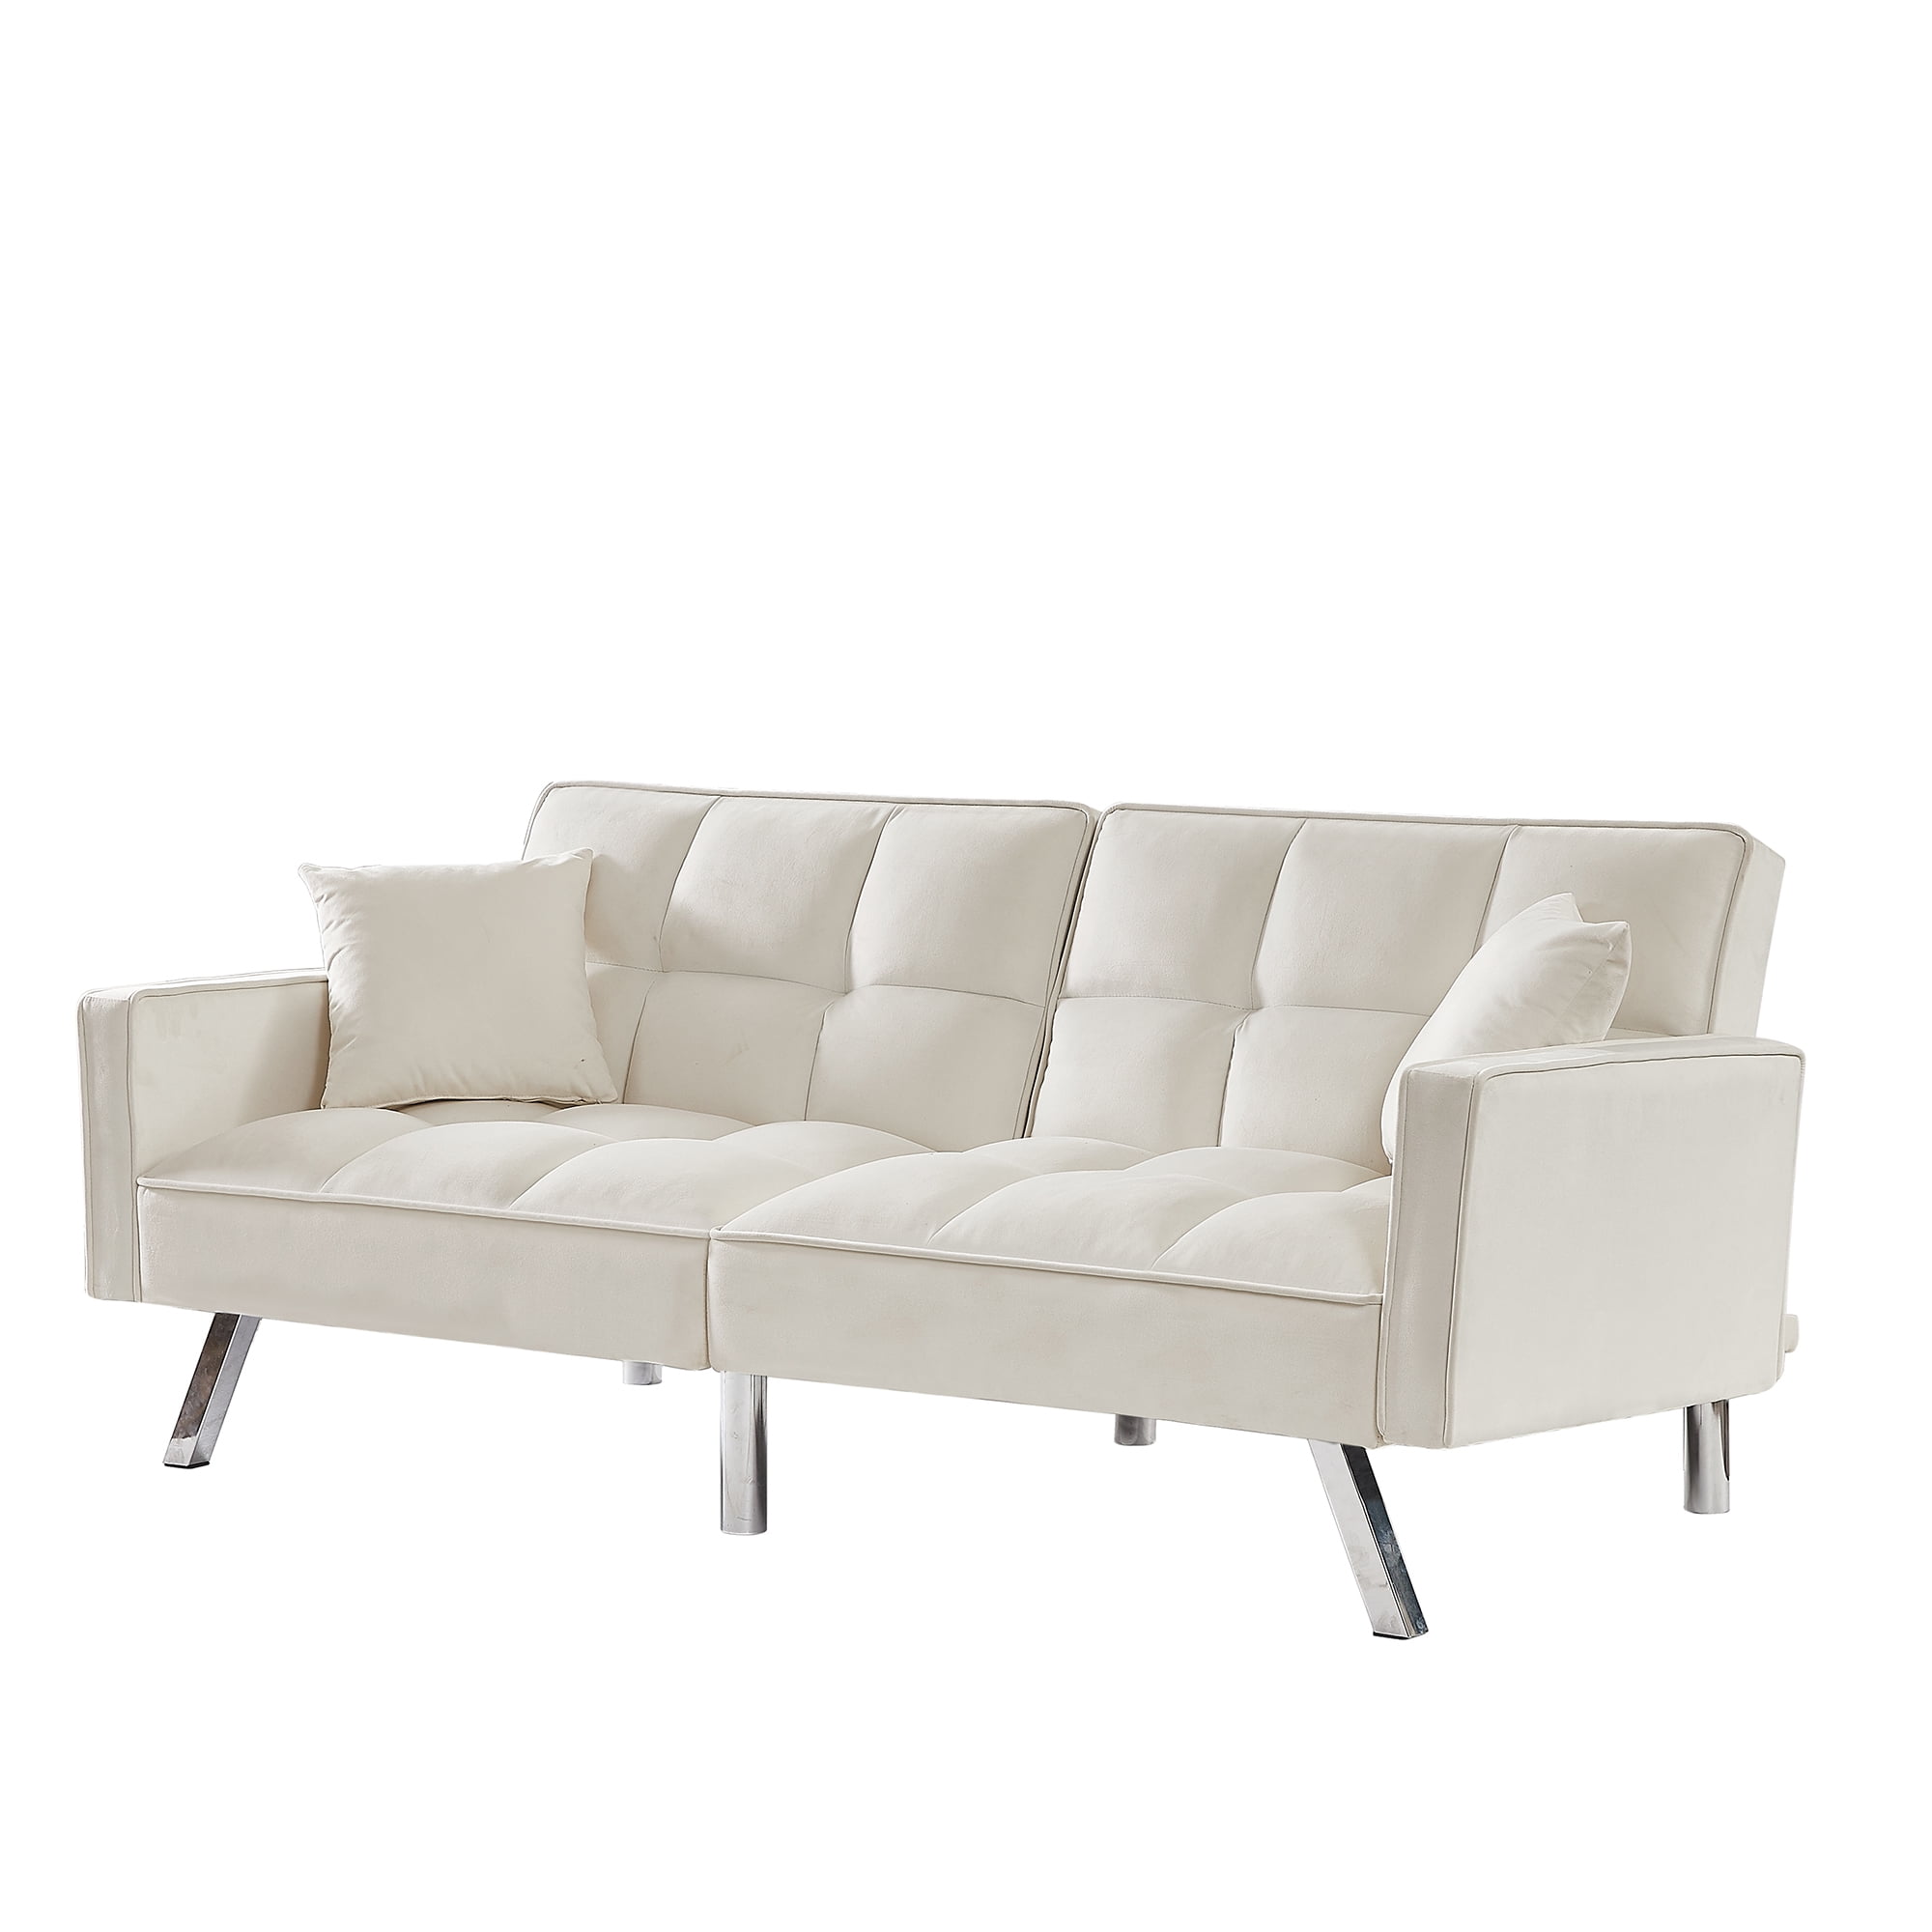 Buy Square Arm Sofa Bed, Modern Sleeper Couches and Sofas with 2 ...